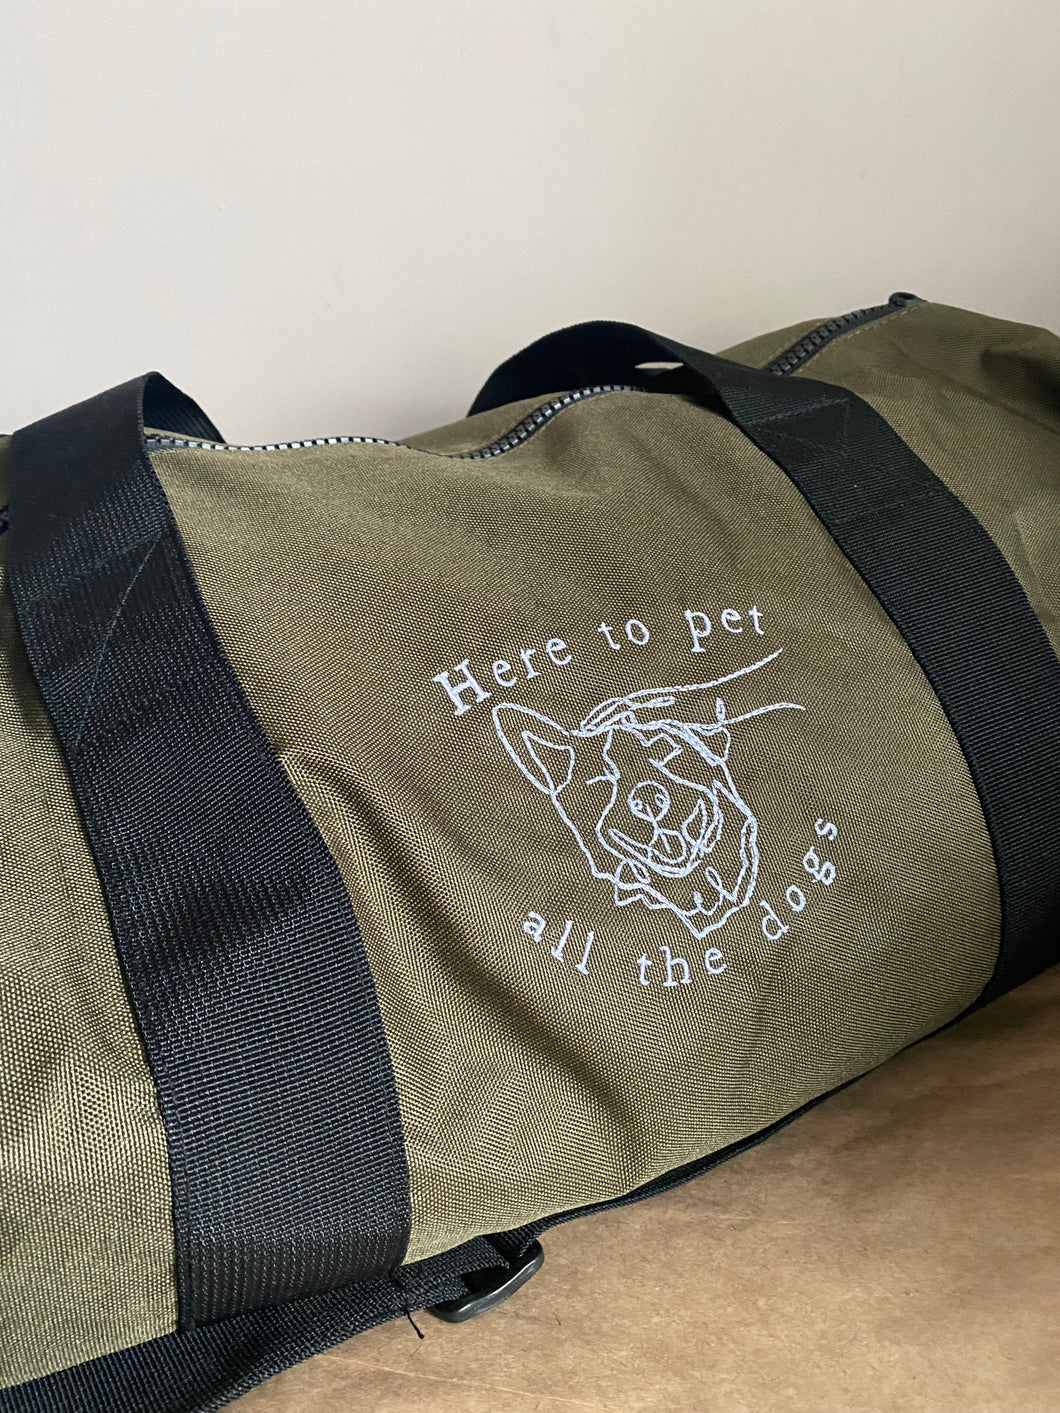 ‘Here to pet all the dogs’ Barrel bag- For dog lovers